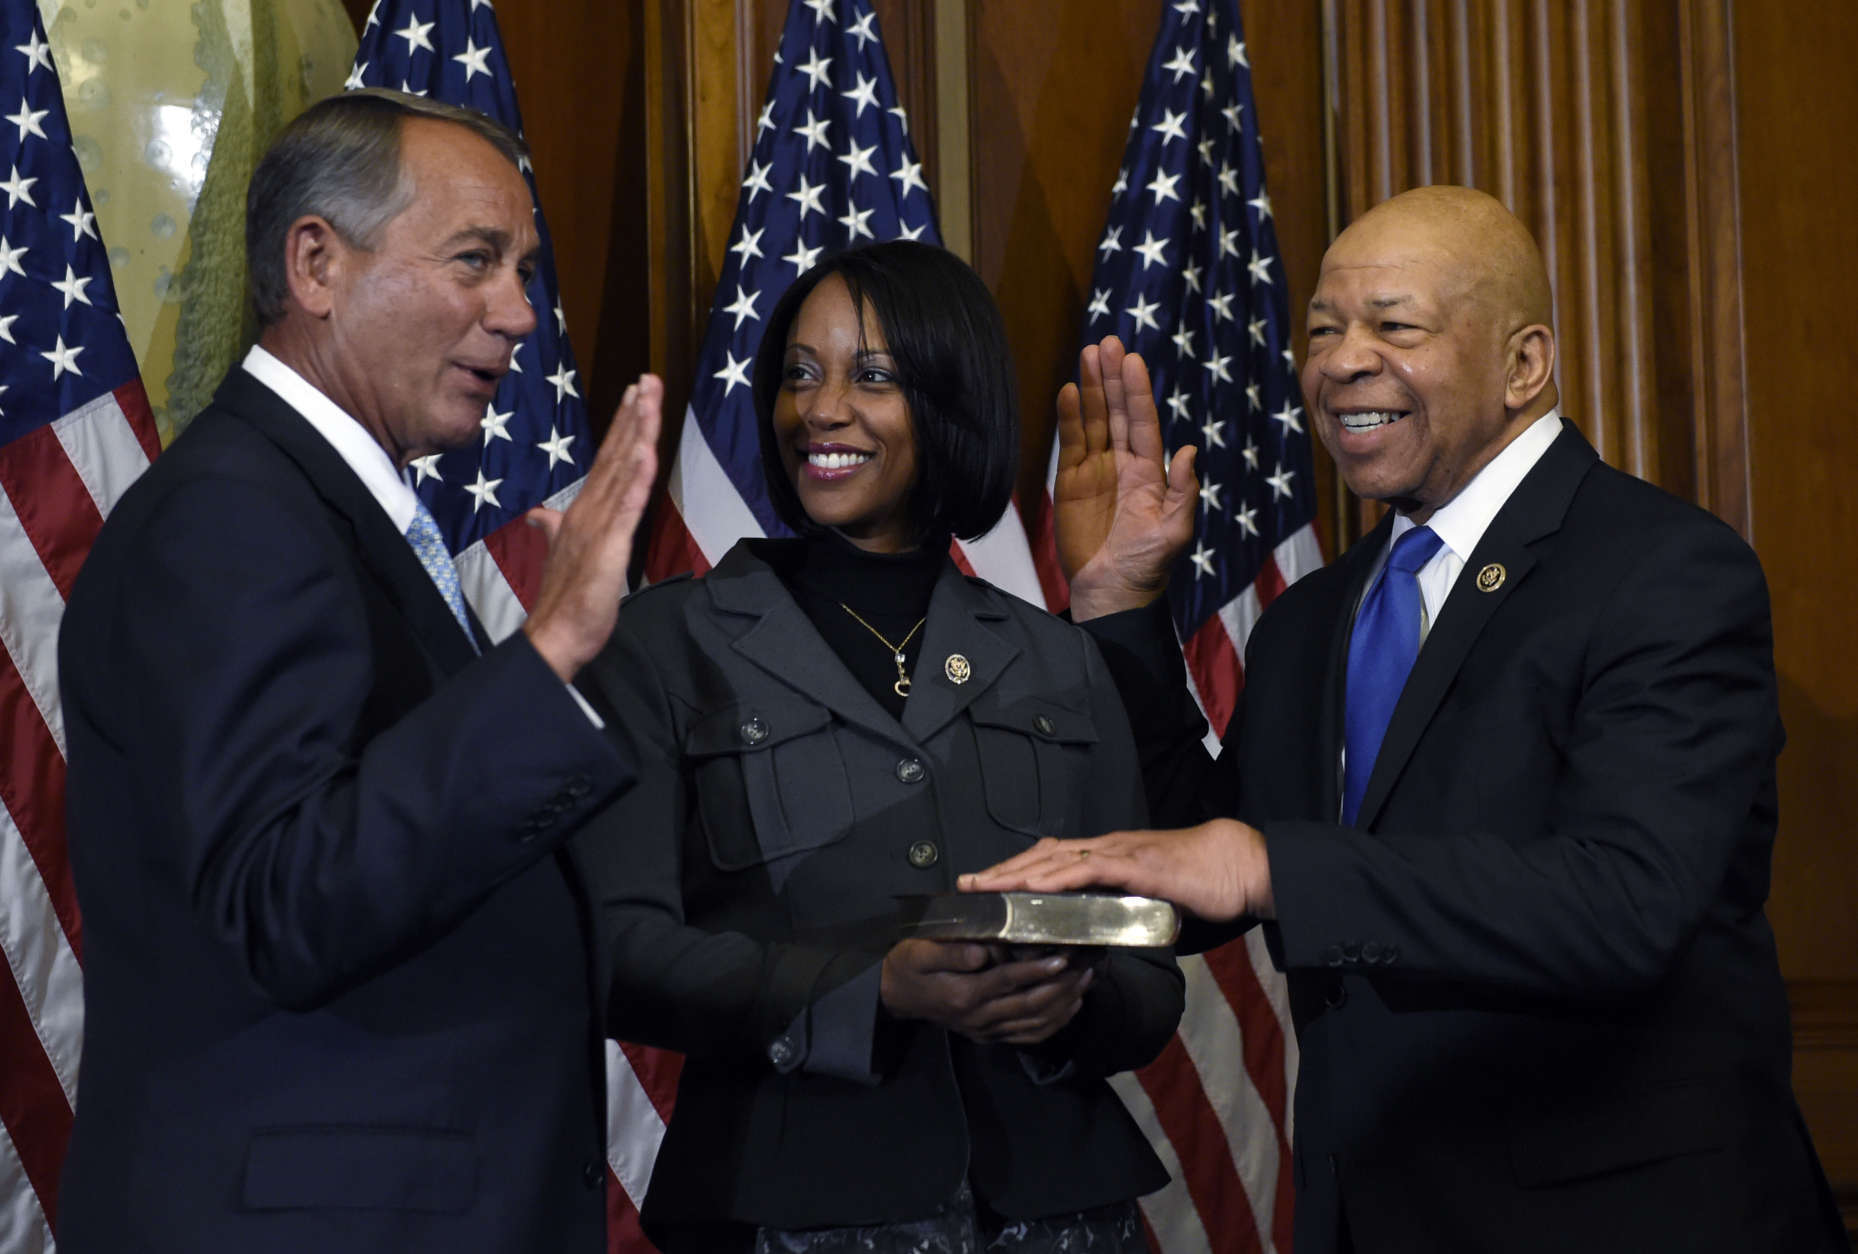 House Speaker John Boehner of Ohio poses for a photo with Rep. Elijah Cummings, D-Md., right, during a re-enactment the House oath-of-office, Tuesday, Jan. 6, 2015, on Capitol Hill in Washington. Cummings' wife Maya Rockeymoore is at center. (AP Photo/Susan Walsh)